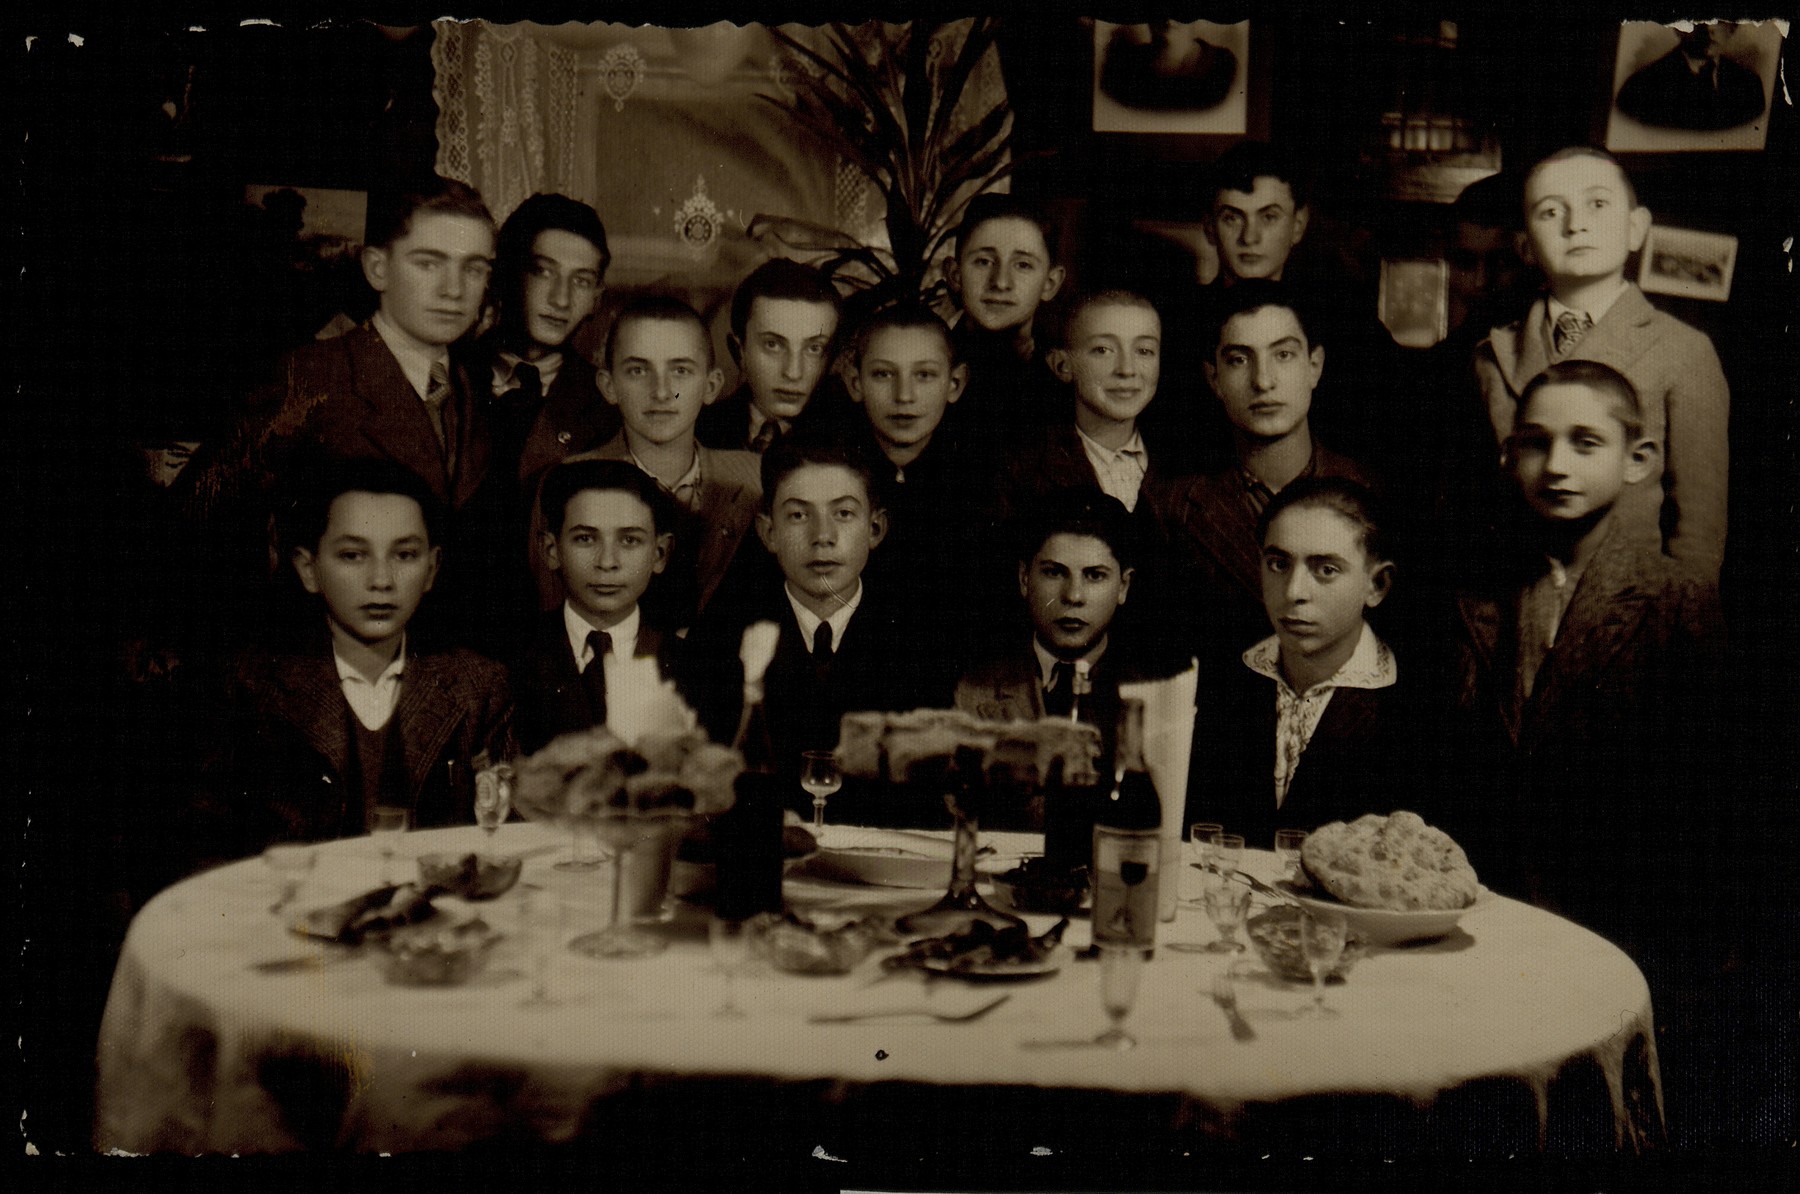 A farewell party for the Shlanski brothers in honor of their impending immigration to America. 

Sitting from left to right: unknown, Benjamin Shlanski, Fischl Shlanski, Tuvia Blacher, Moshe Ginunski. Standing at far right (in front) is Moshe Kremin (a cousin of tShlanskis).  Second row, right to left: Leon (Leiba) Shlanski, Zalman Zubizki., Bezalel Charney.  Names of other boys are unknown. 

The Shlanski siblings immigrated to America.  All the other boys in the photo were murdered by the Germans during the September 1941 mass killing action in Eisiskes.